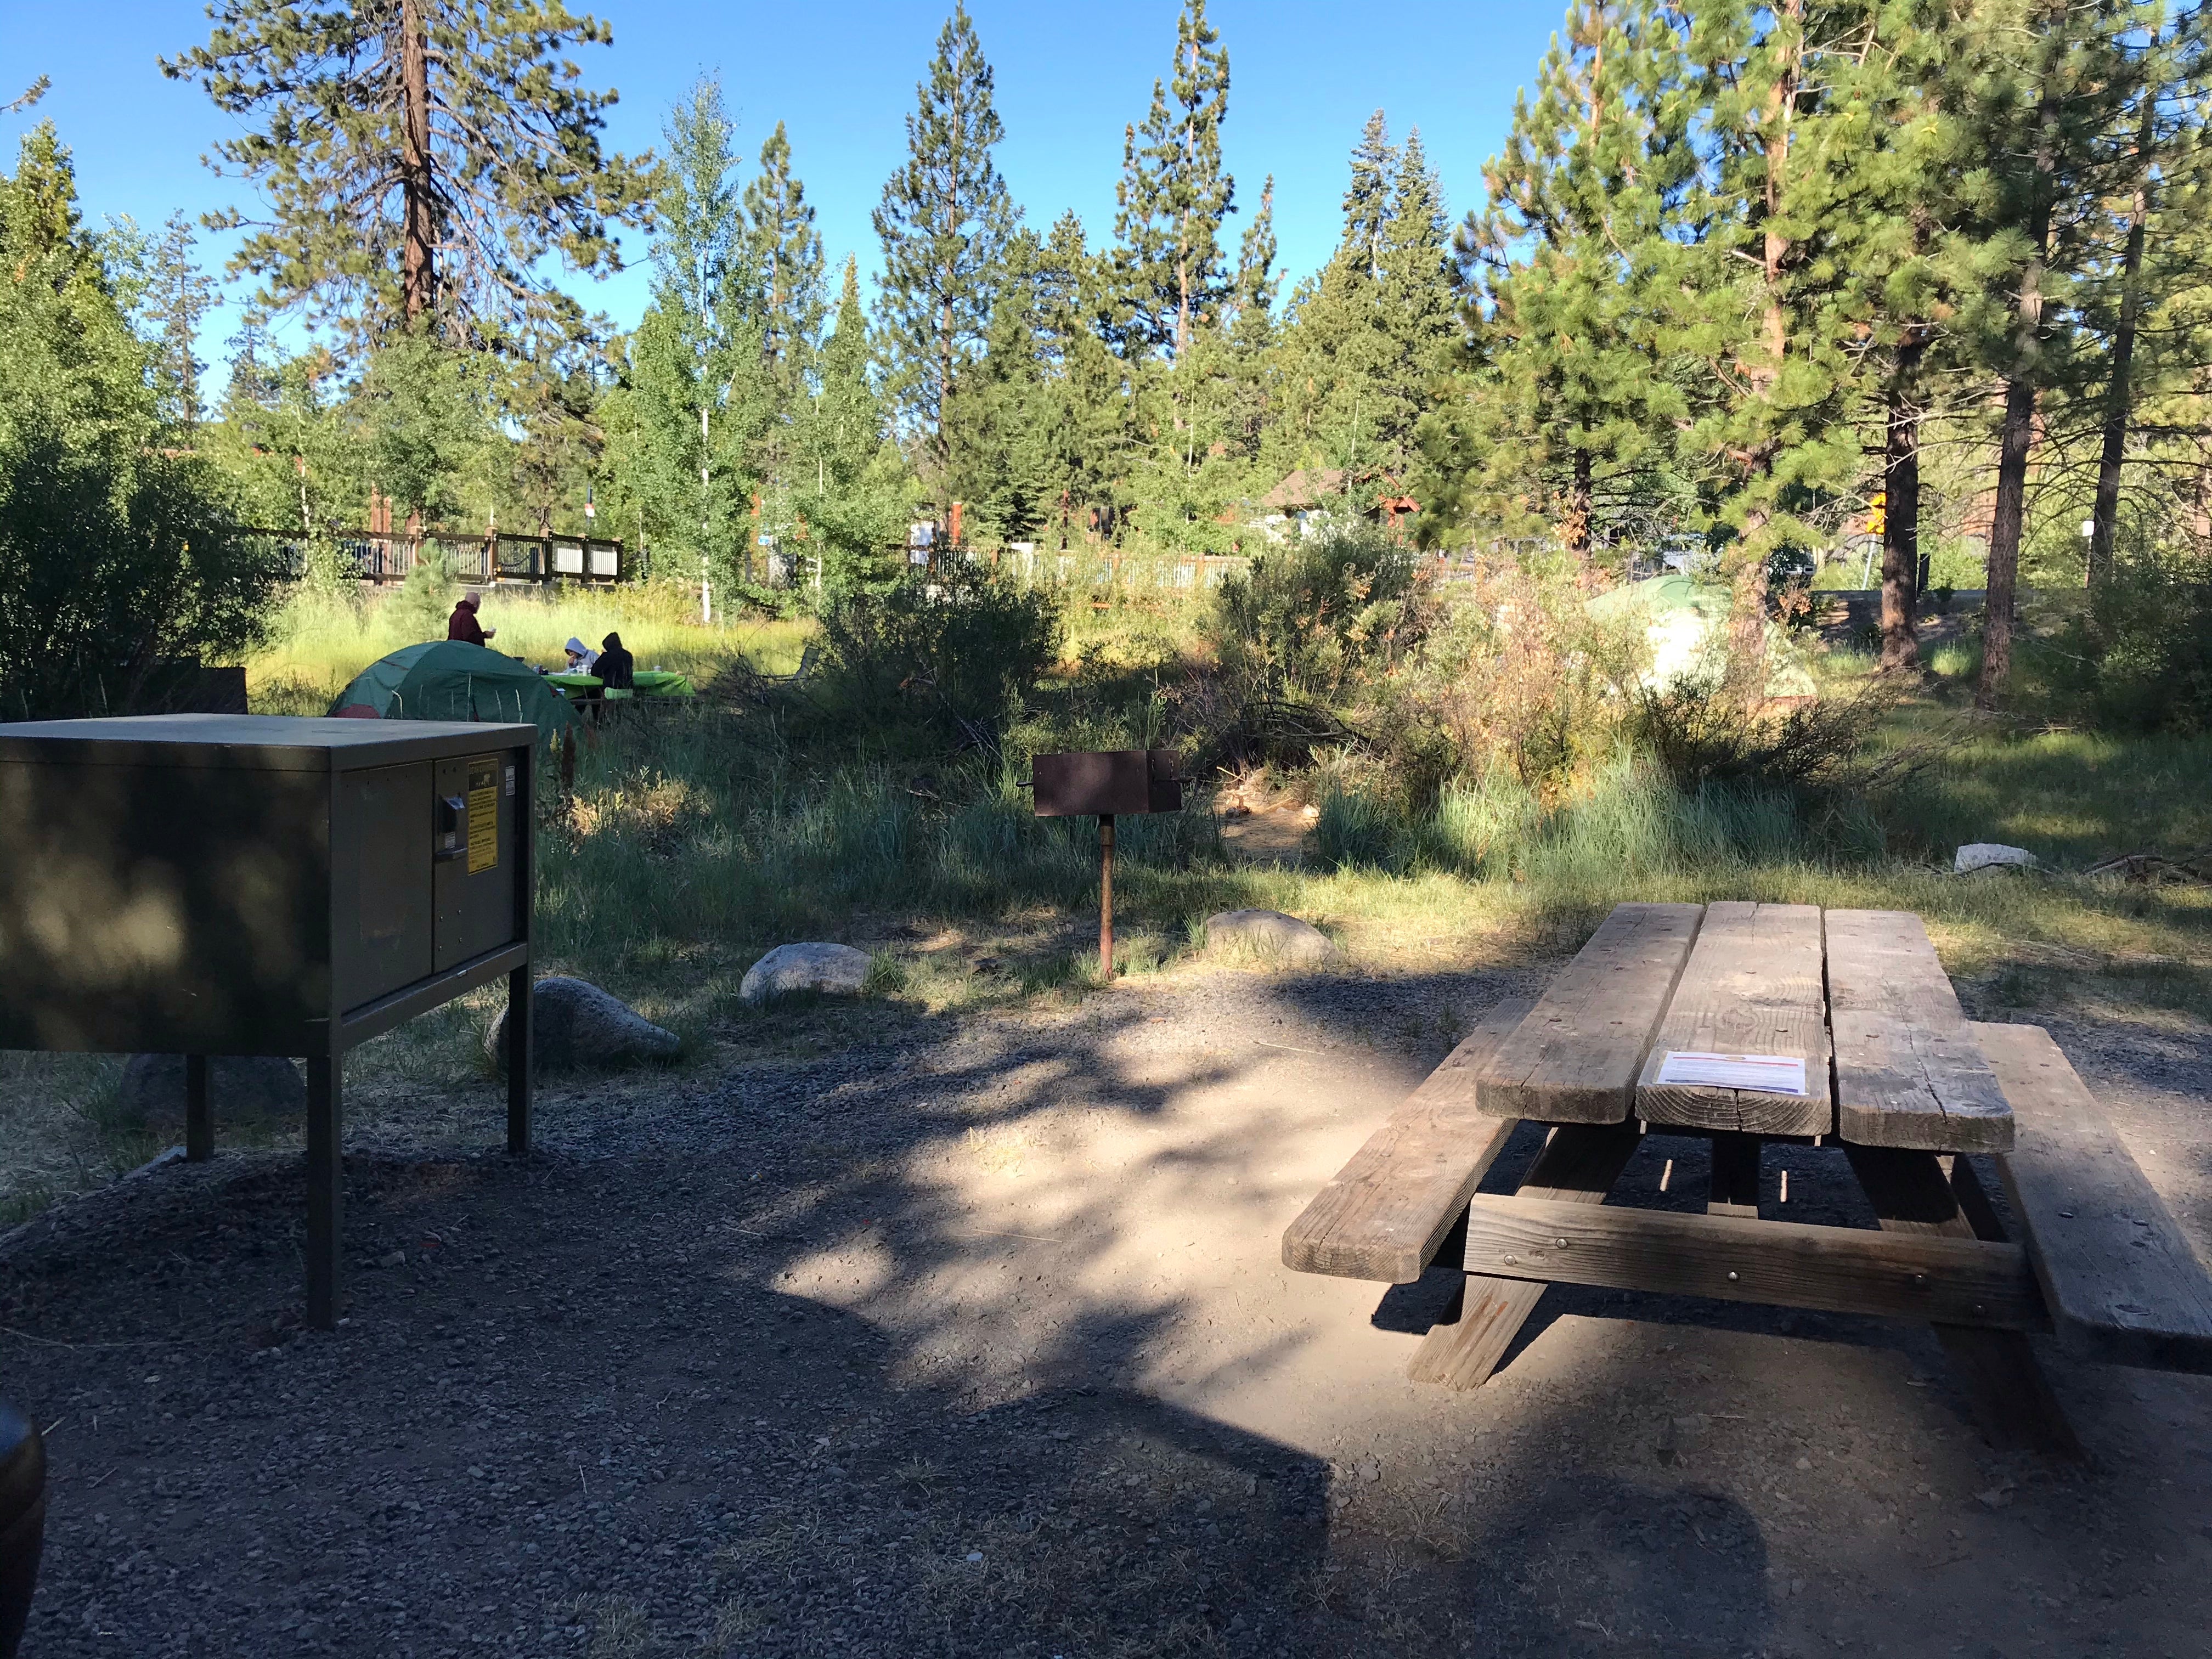 Camper submitted image from Tahoe State Recreation Area Campground - 4